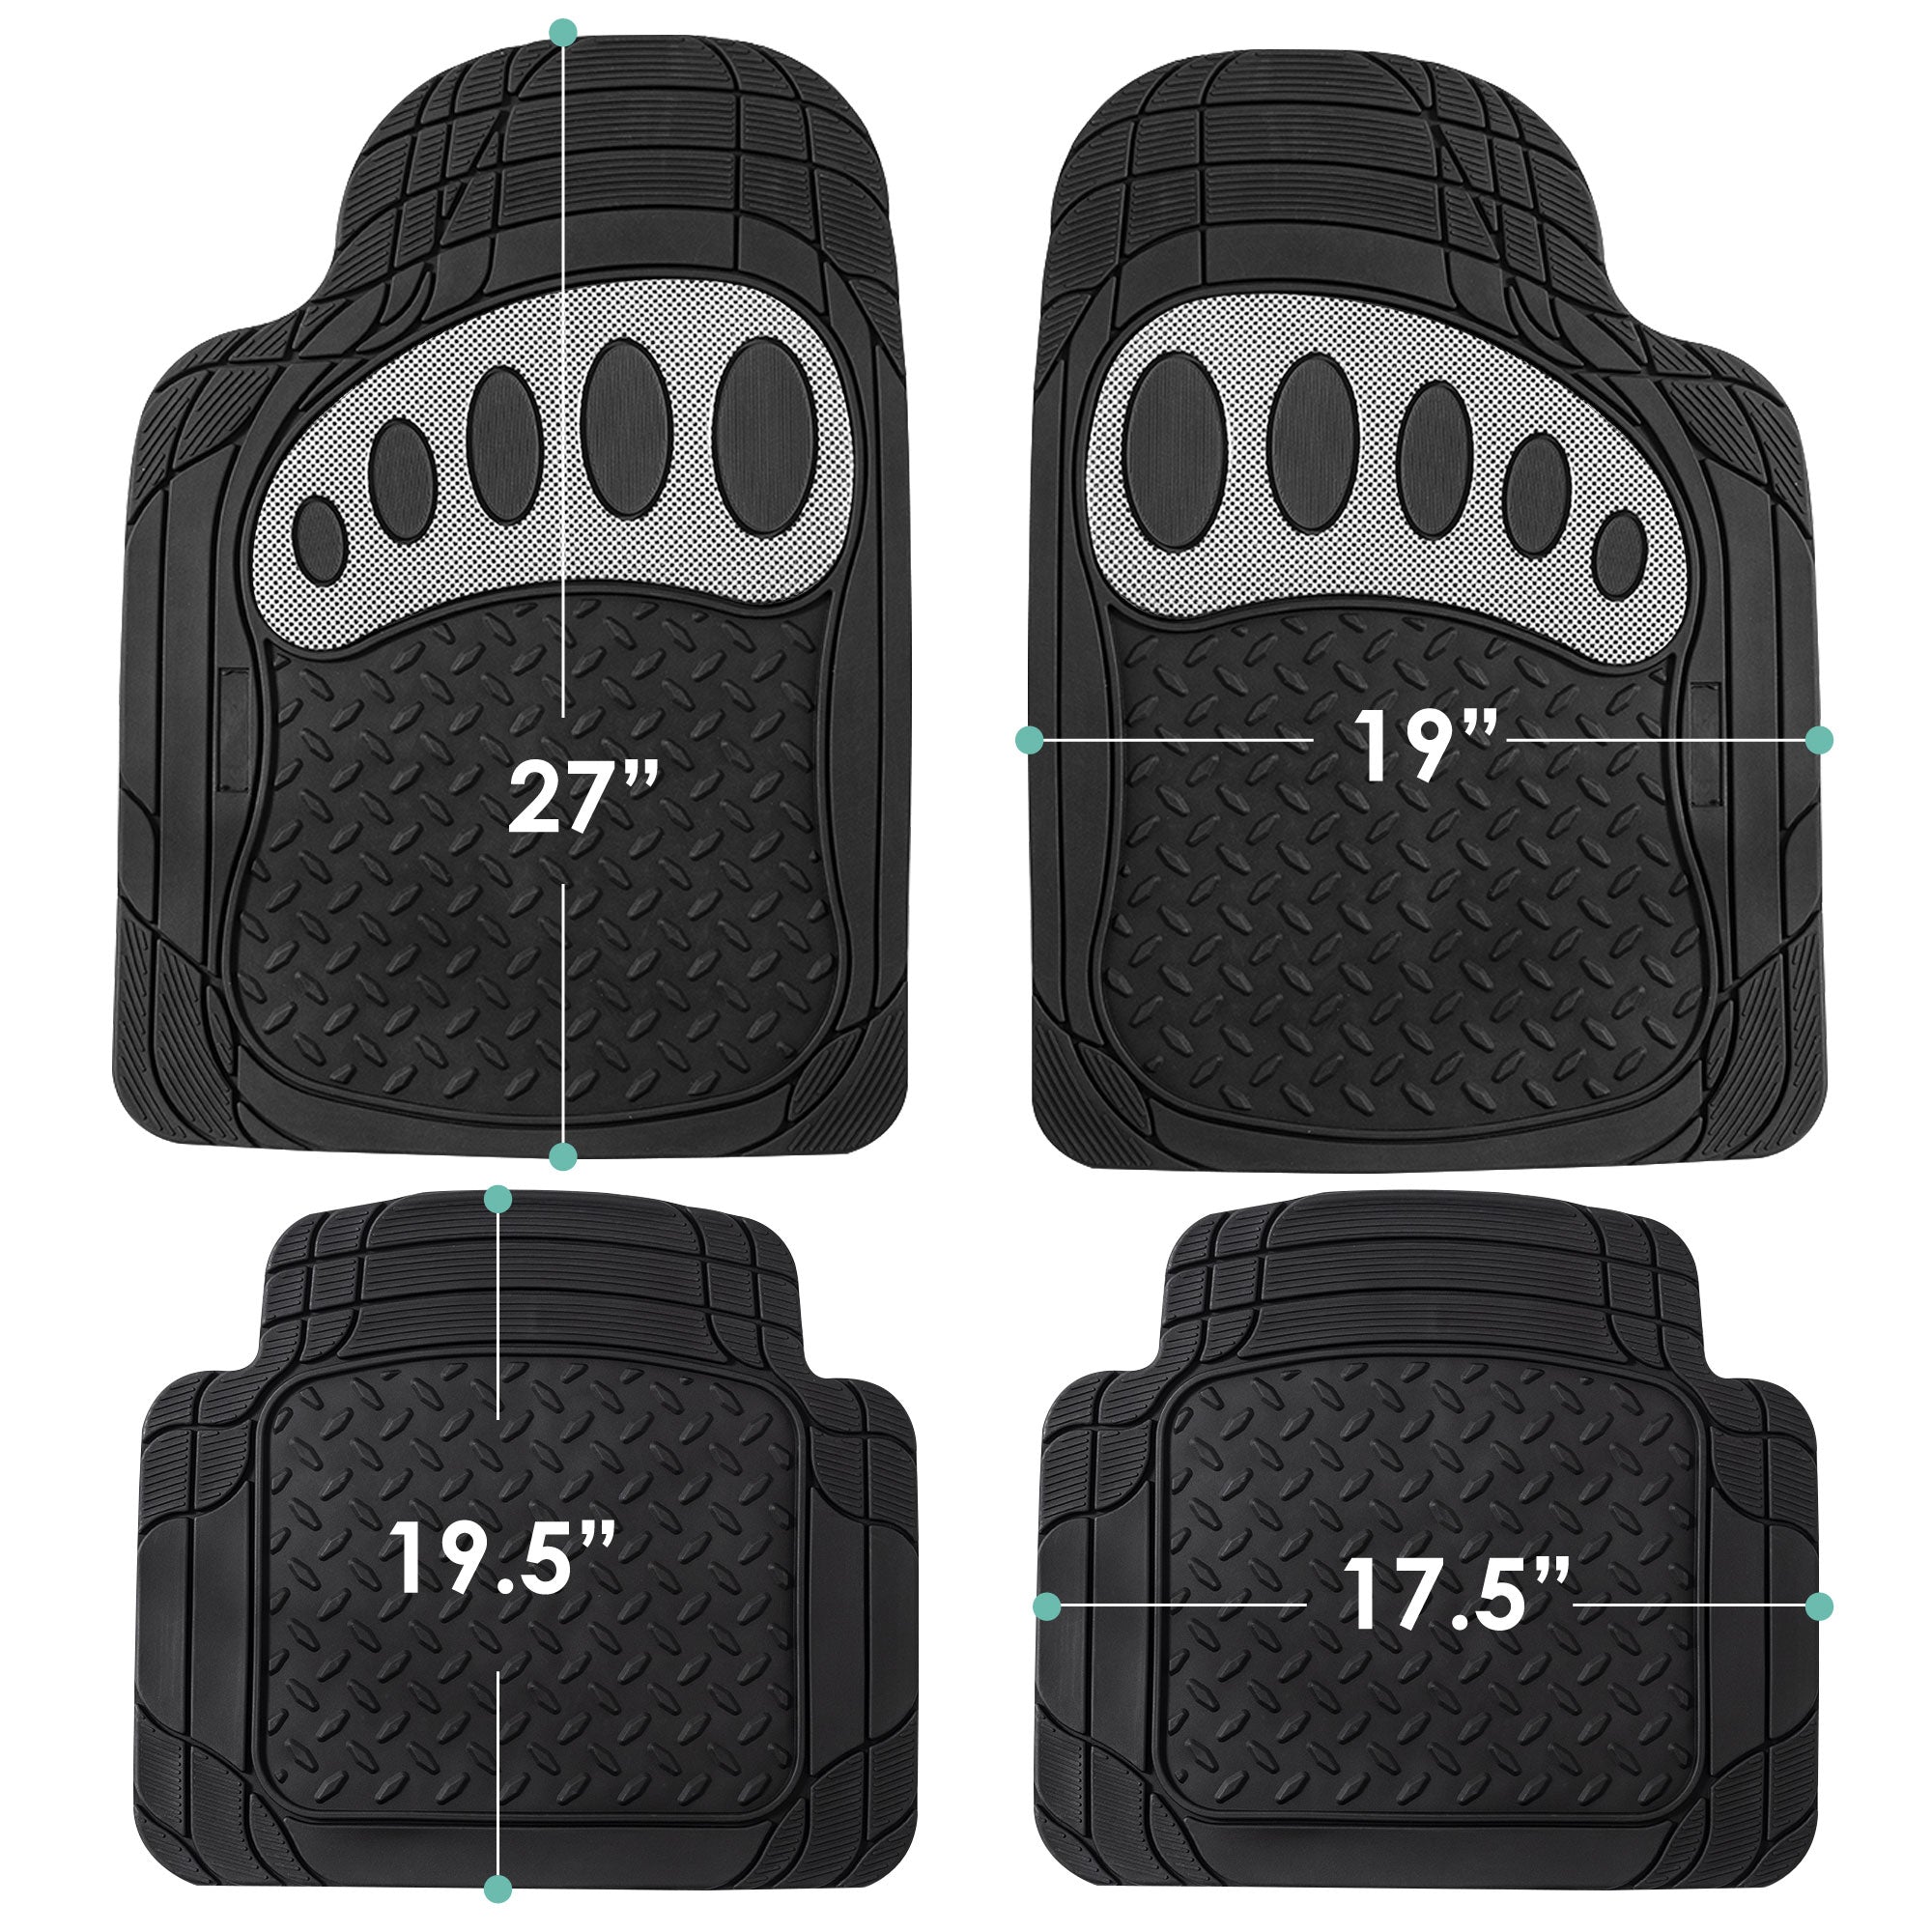 Trimmable ClimaProof Non-Slip Rubber Floor Mats With Footprint Design - Full Set White